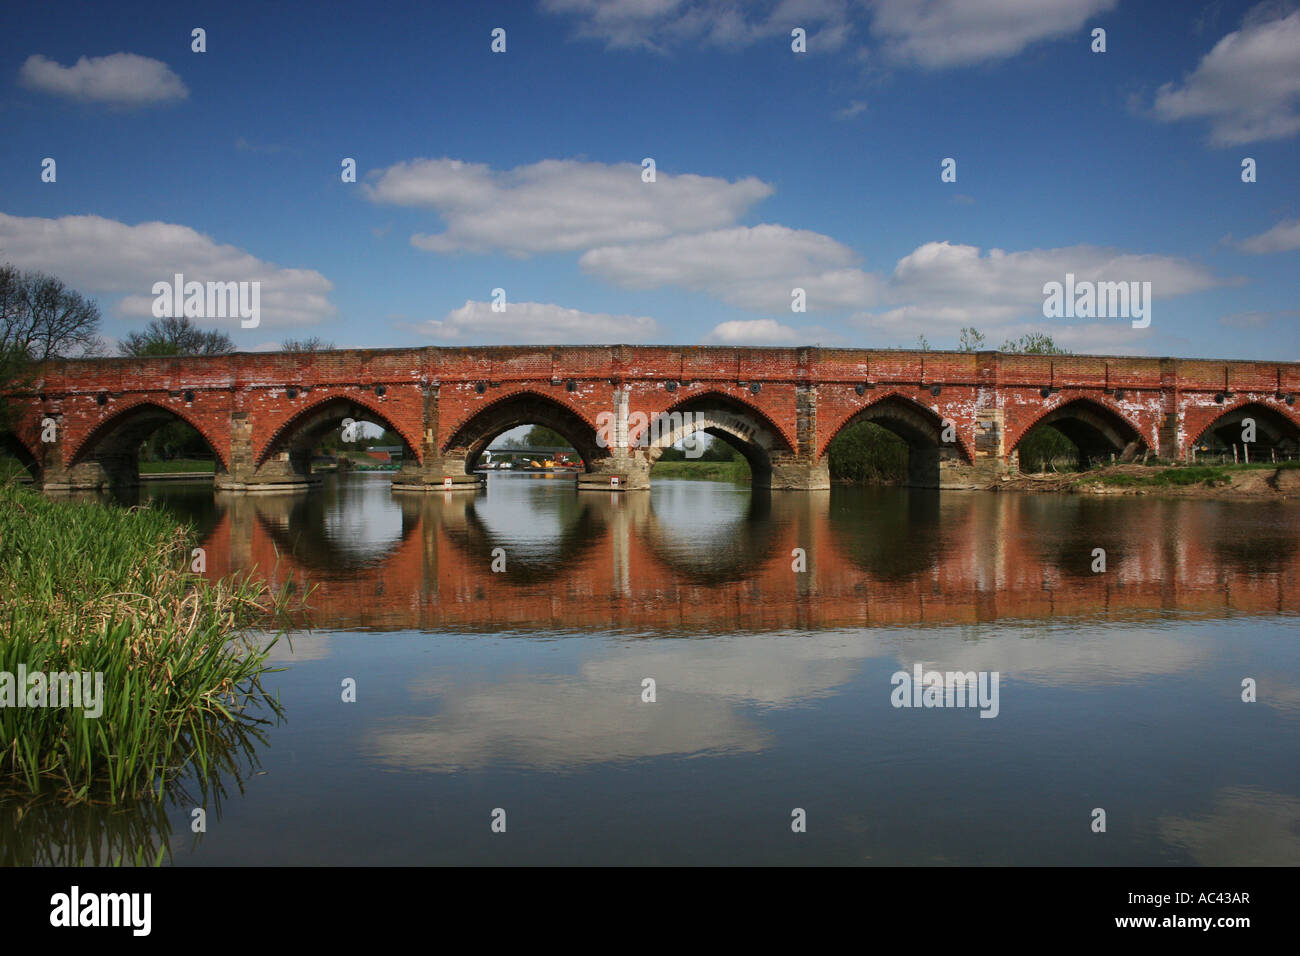 Great Barford bridge spanning River Great Ouse, Bedfordshire. Landscape. Full colour. Stock Photo